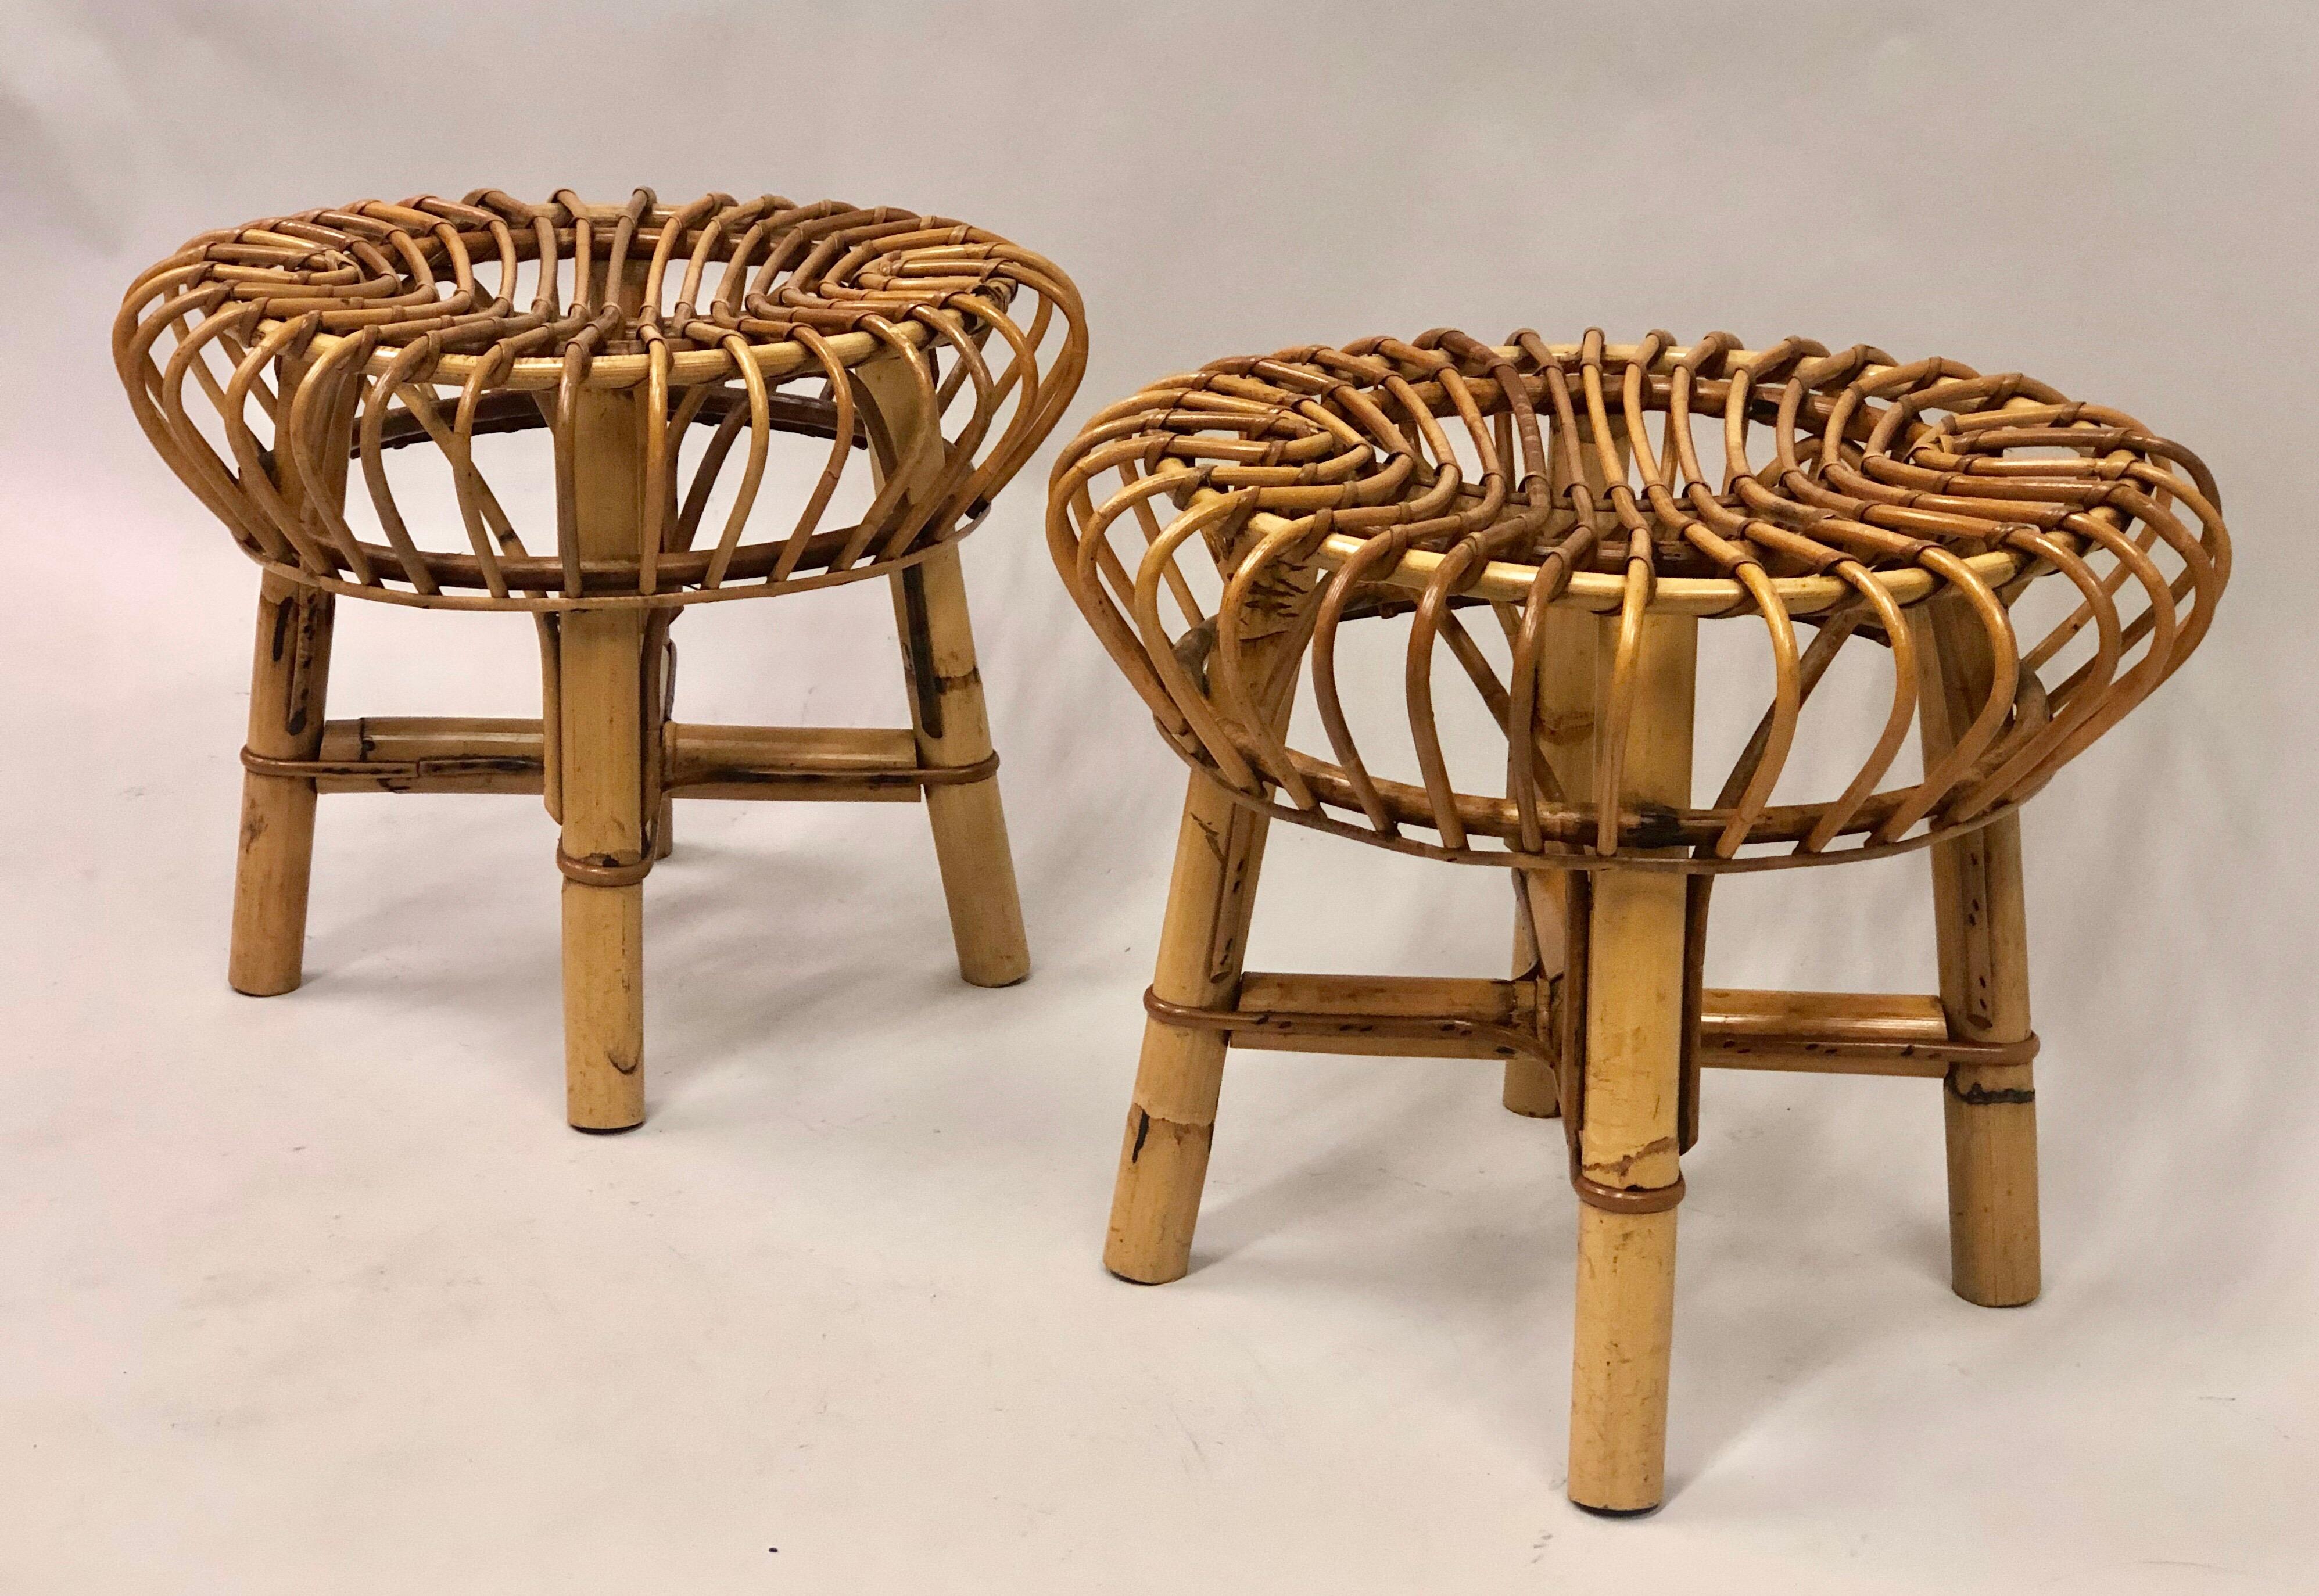 Elegant pair of Italian Mid-Century Modern rattan and bamboo stools / benches / ottomans by Franco Albini

Rare, master architectural works by Franco Albini that Revel in their purity and poetry of form. 



 